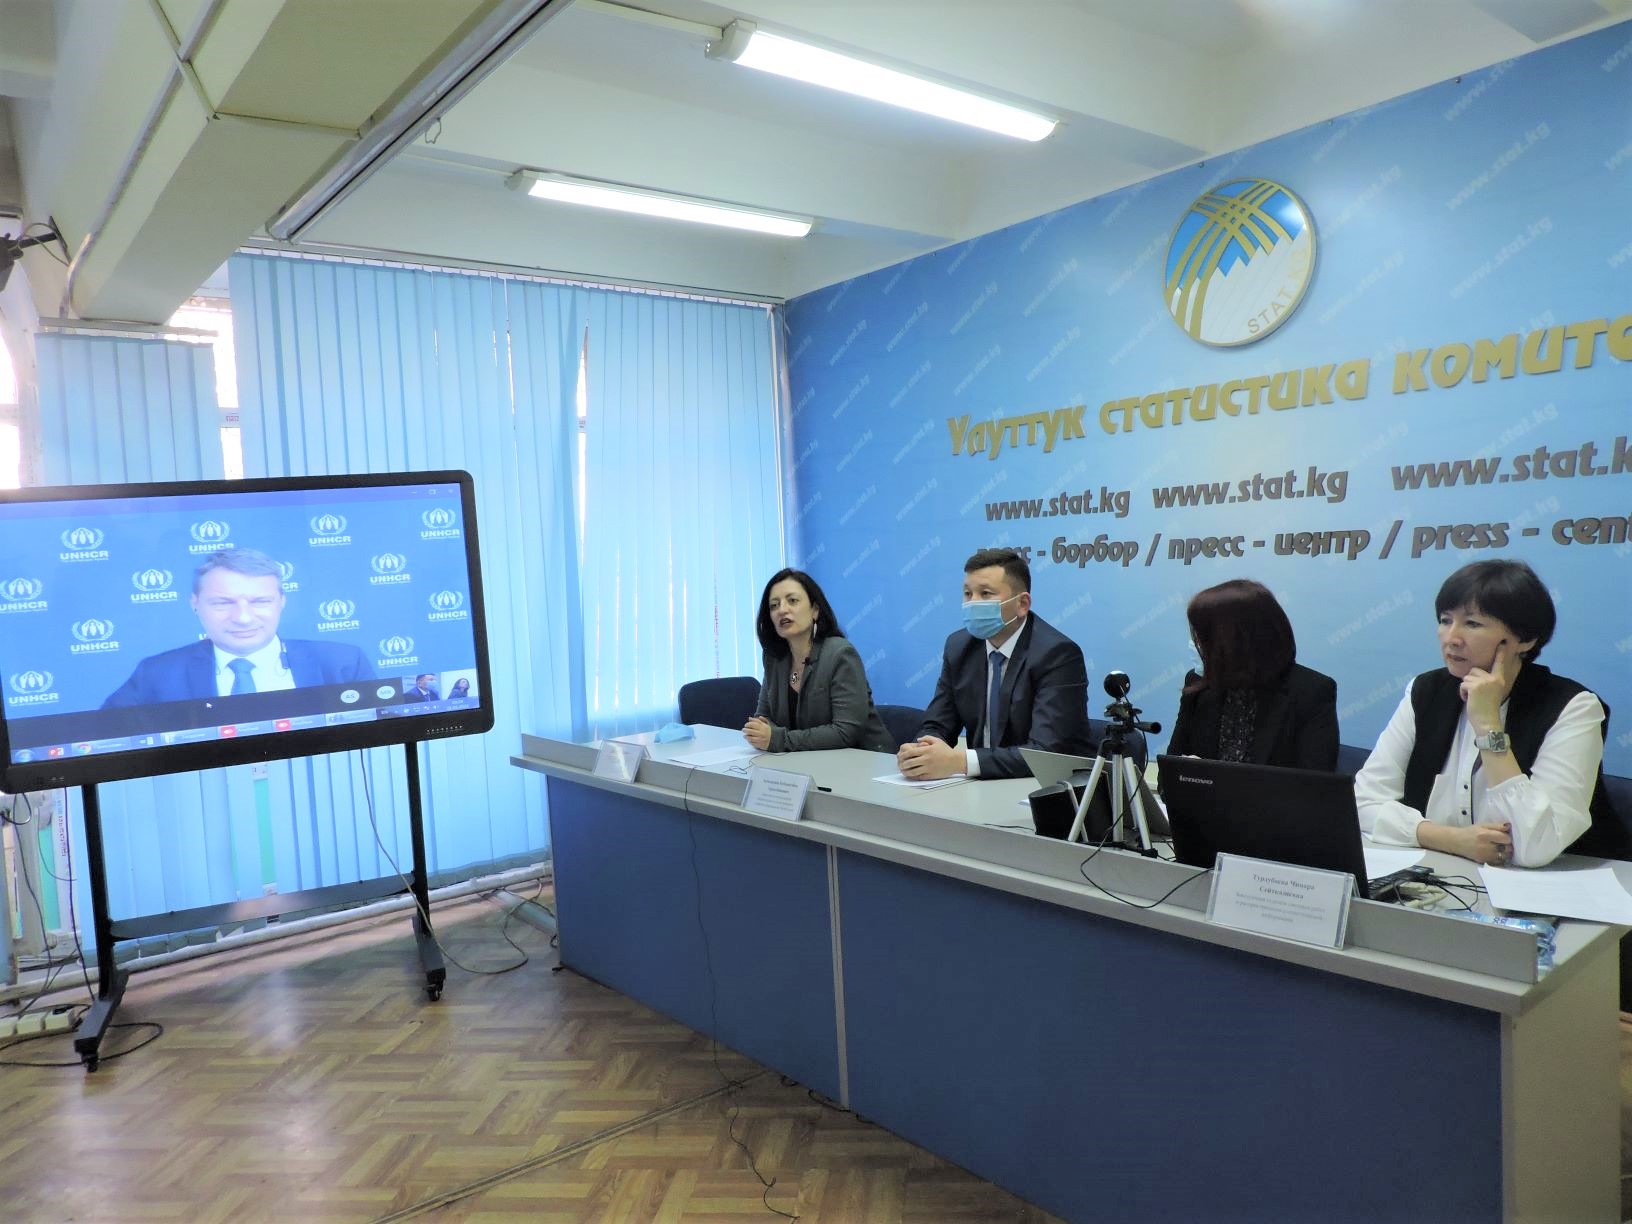 UNHCR and UNFPA handed over PPE for population census in Kyrgyzstan